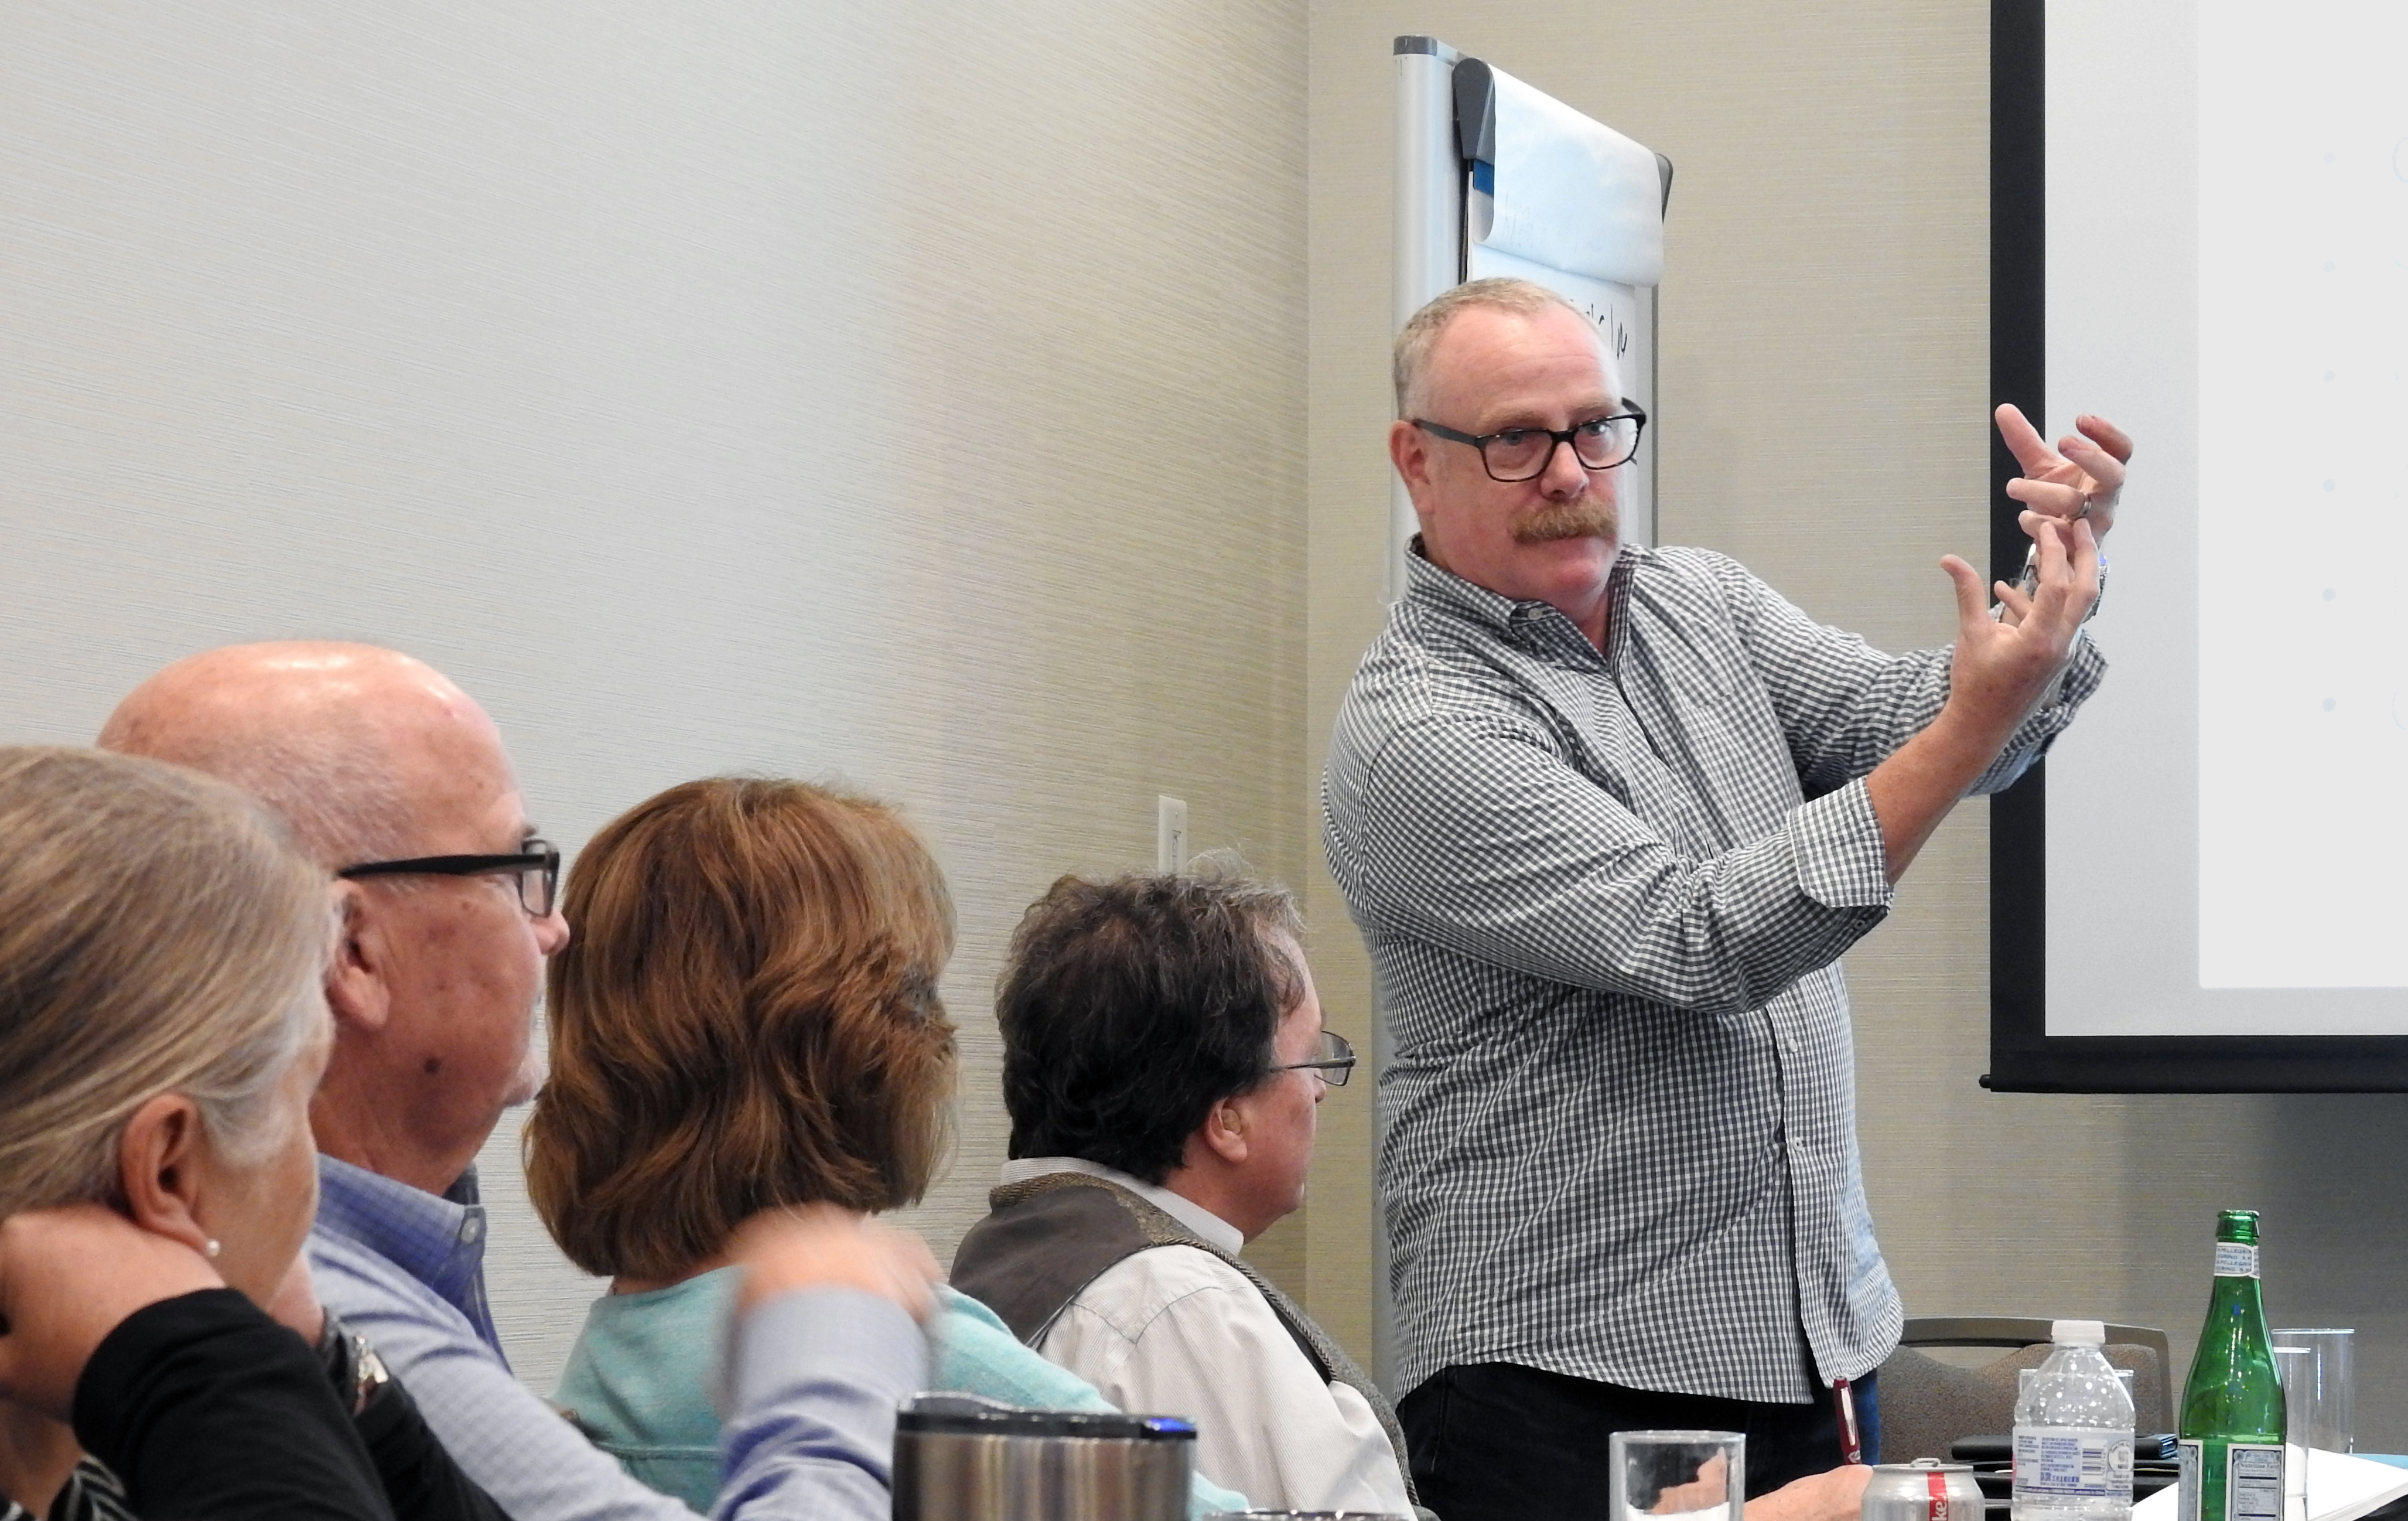 Chris Willard of Leadership Network shares insights with United Methodist executive pastors meeting in Dallas. This peer learning group is one of 16 sponsored by the Texas Methodist foundation, involving about 300 clergy and laity. Photo by Sam Hodges, UMNS.